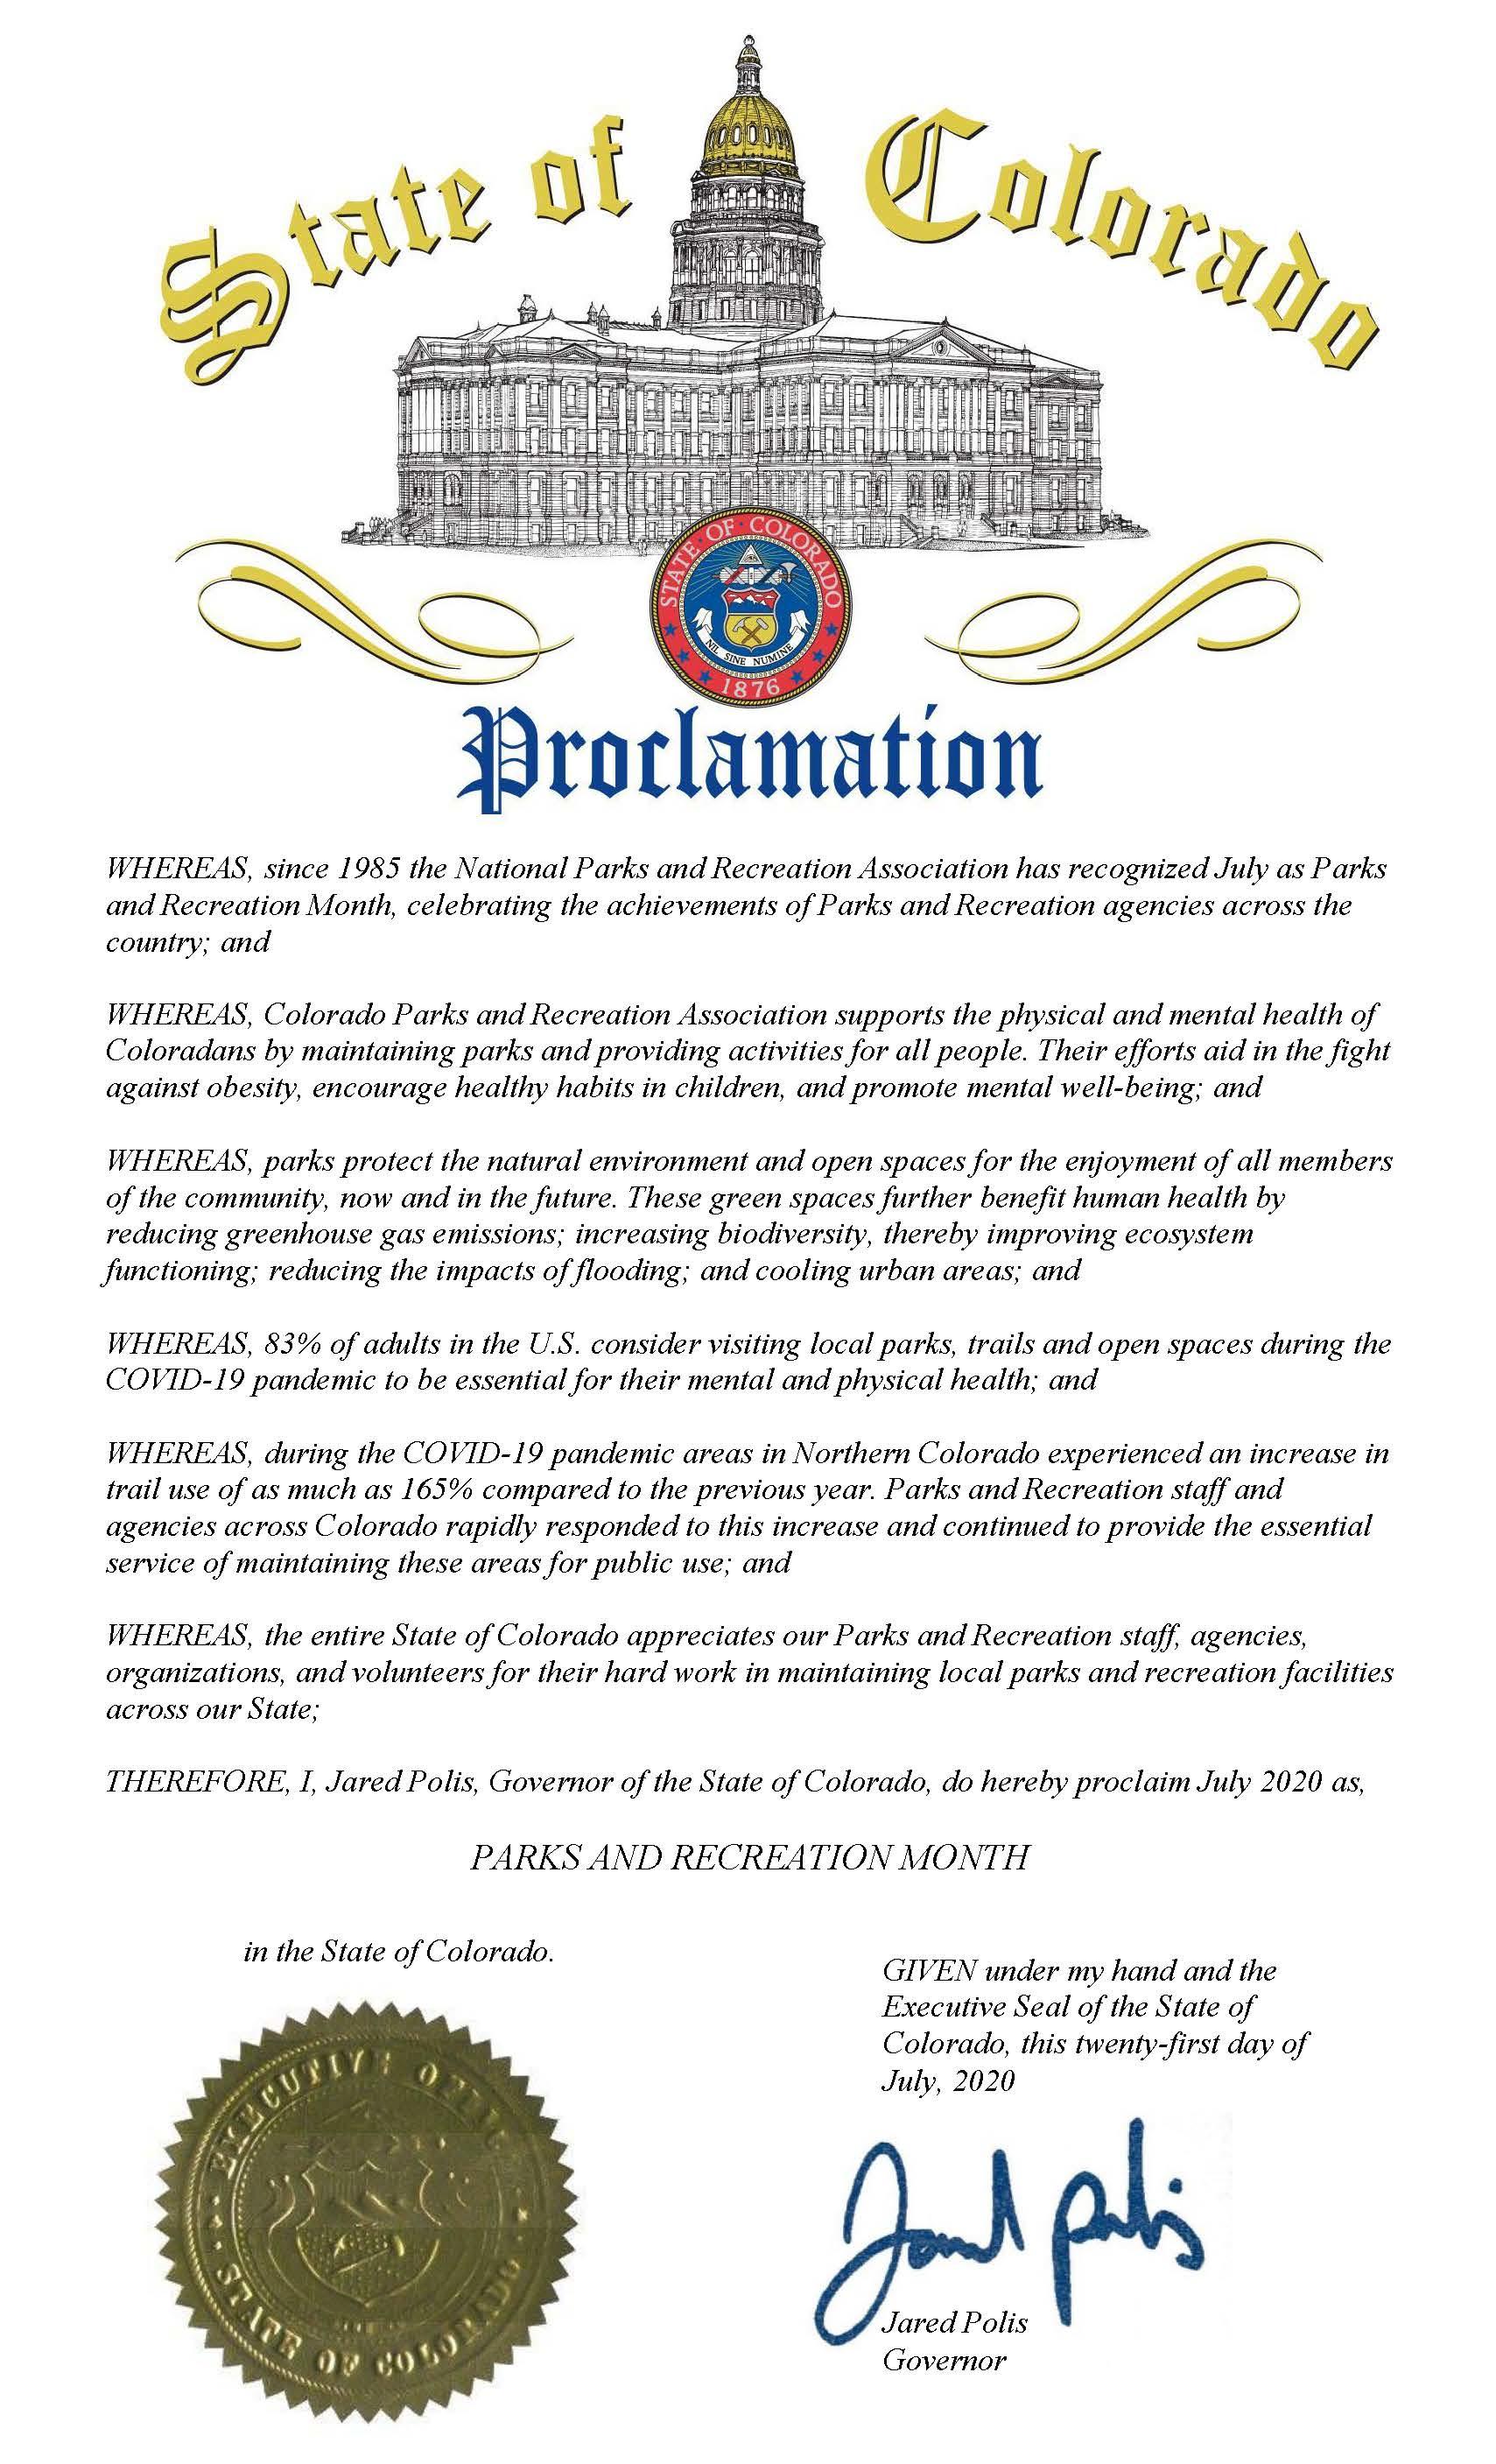 Proclamation from Governor Polis on July being Parks and Recreation Month